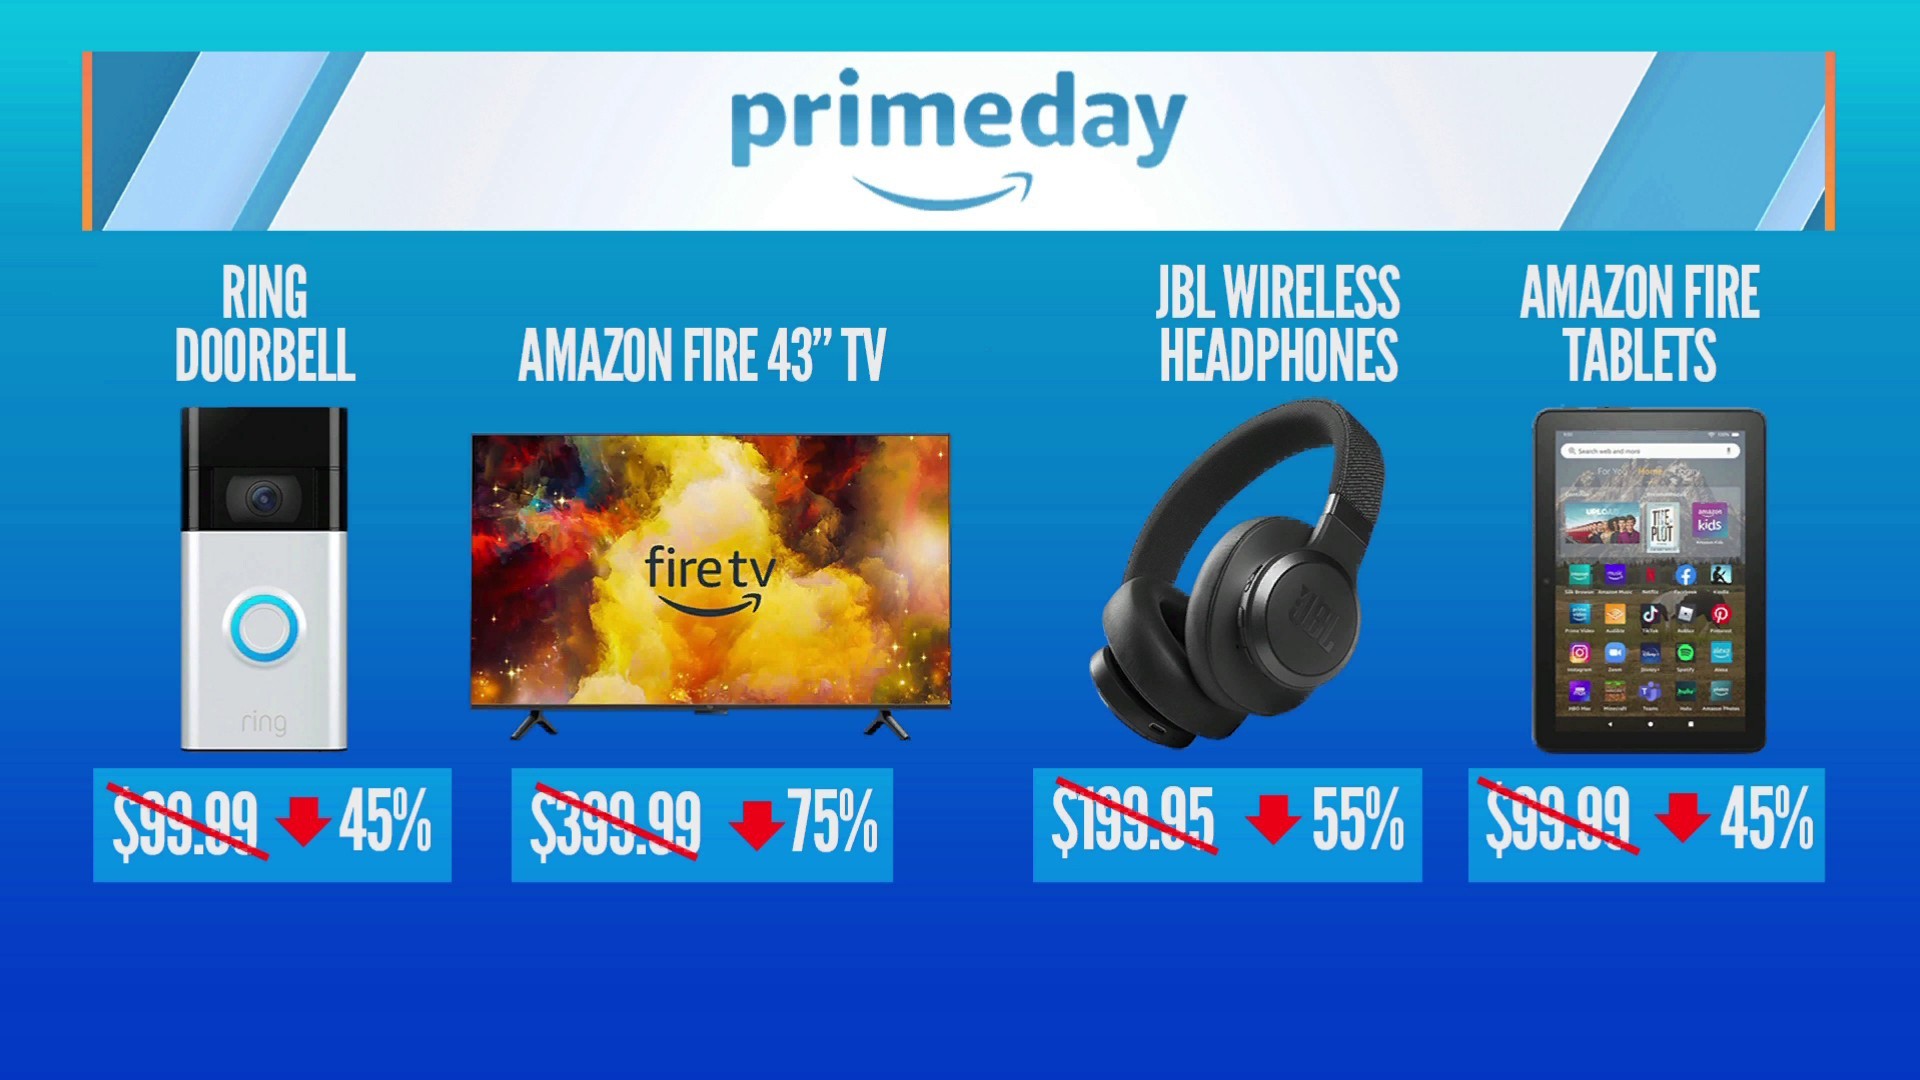 Prime Day returns Oct. 13-14, but you can start saving now